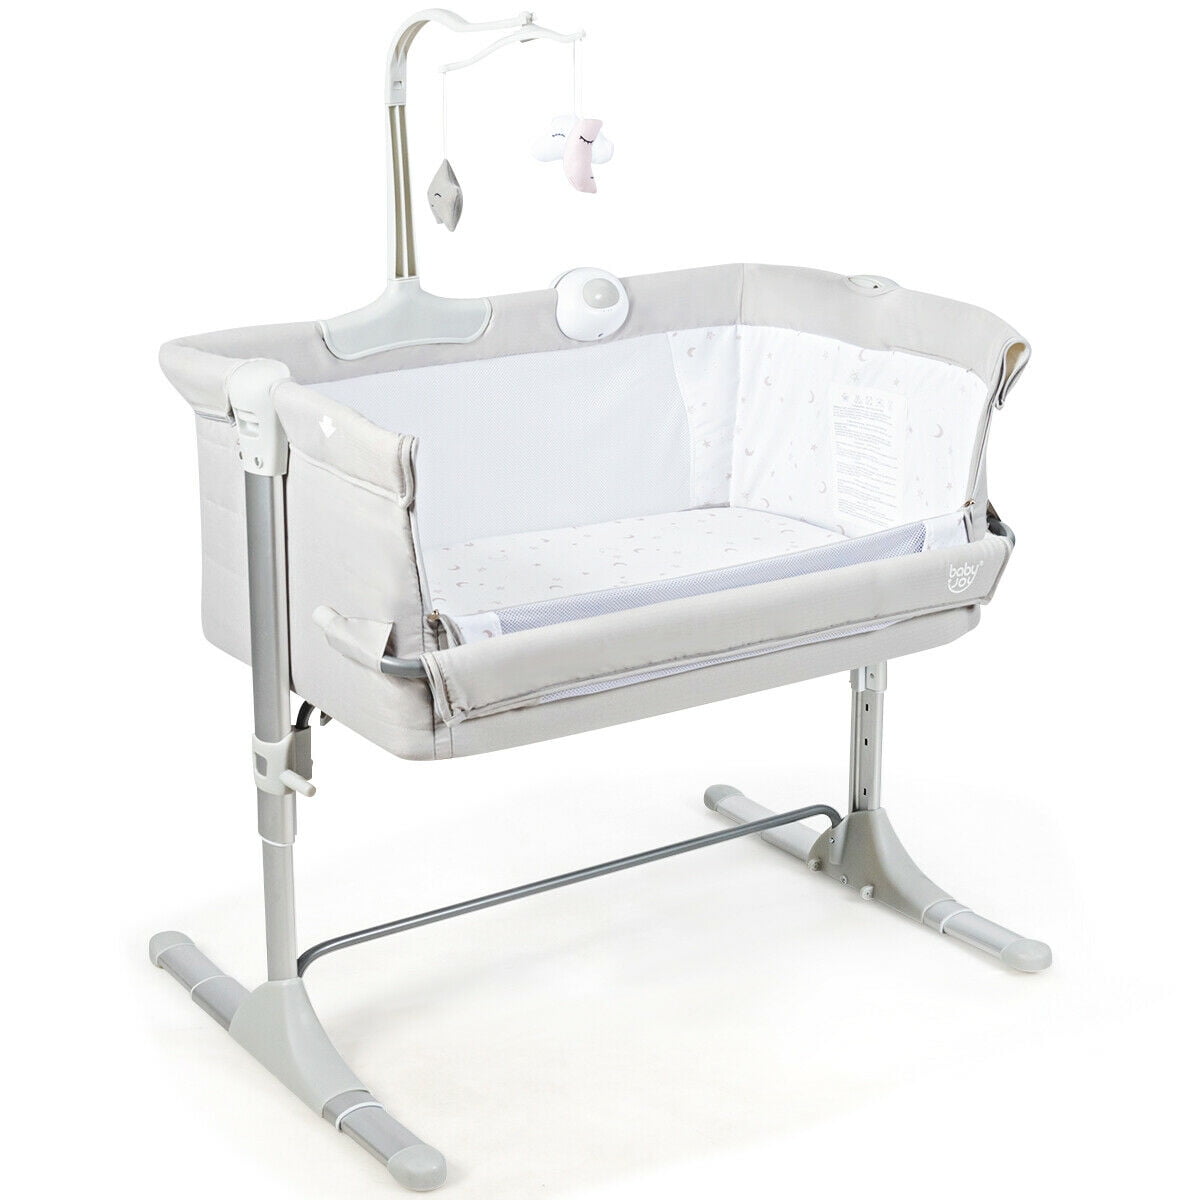 SleepWELL  Portable Baby Bed New Free Shipping 